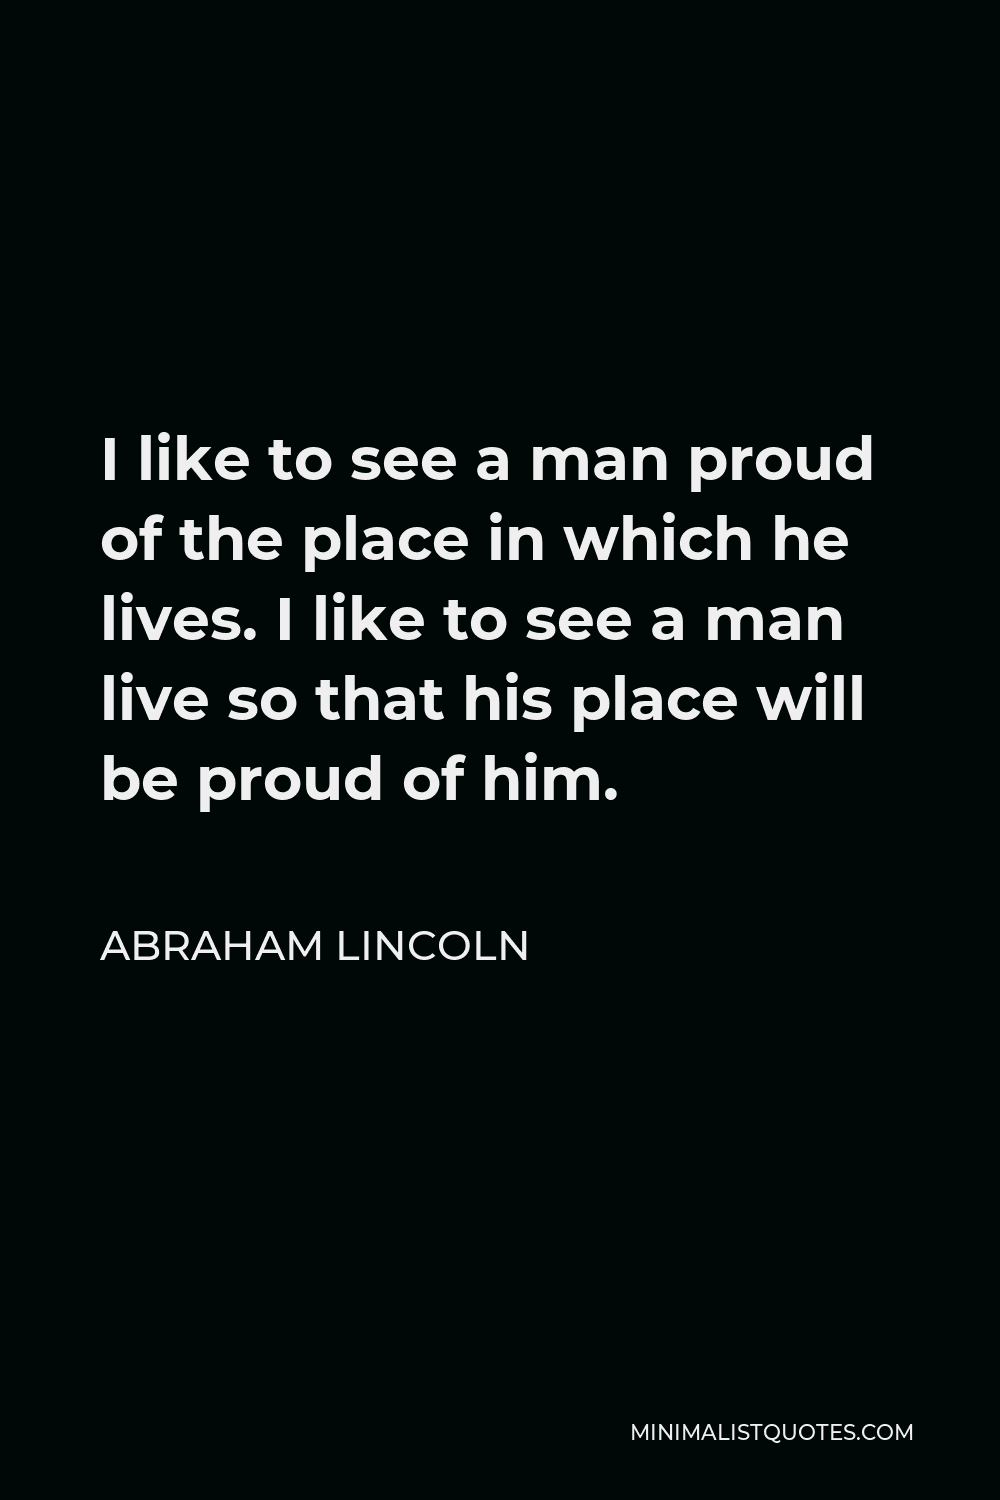 Abraham Lincoln Quote - I like to see a man proud of the place in which he lives. I like to see a man live so that his place will be proud of him.